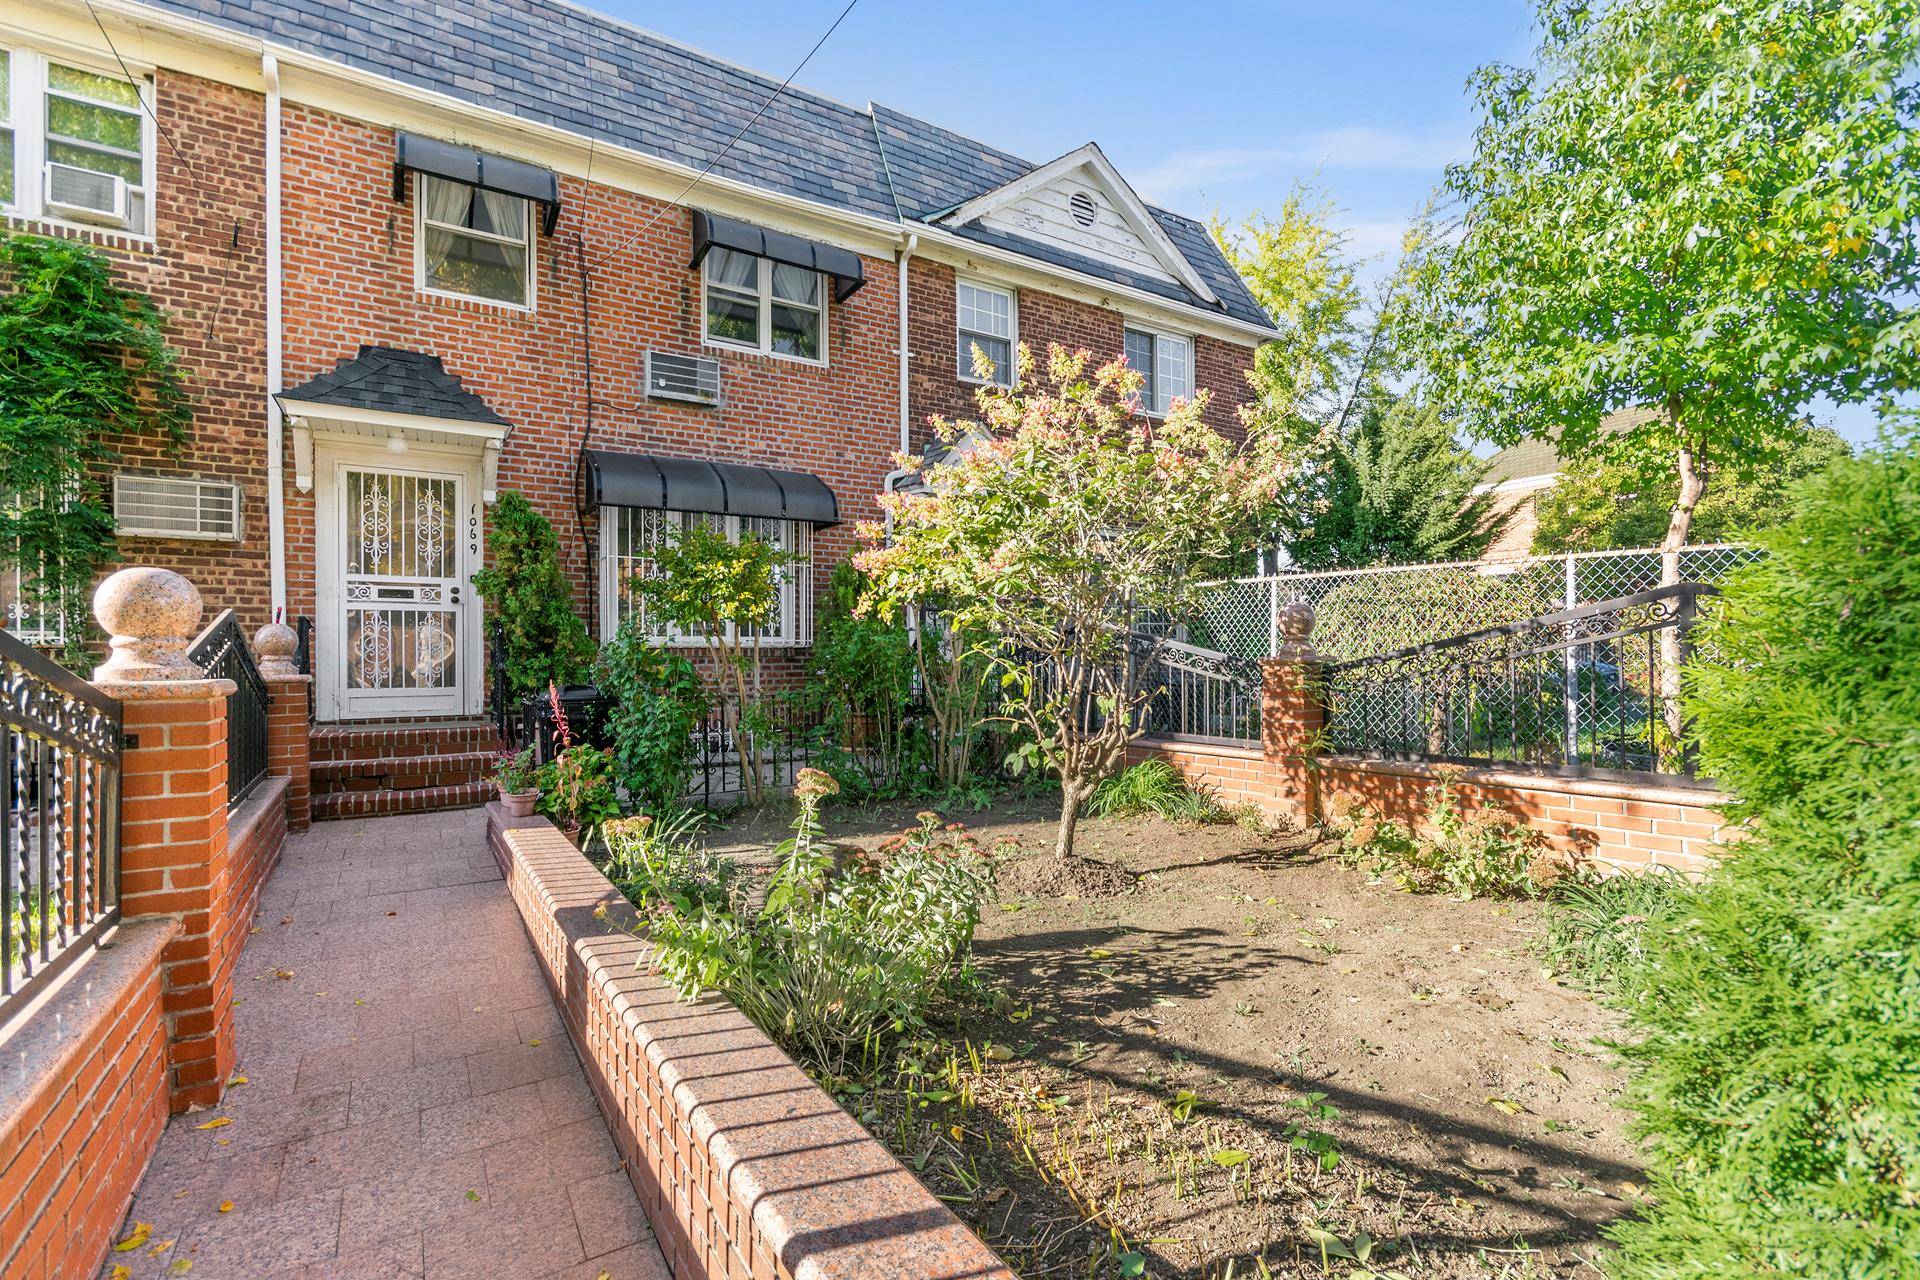 This absolutely charming solid brick townhome is everything you've been searching for.